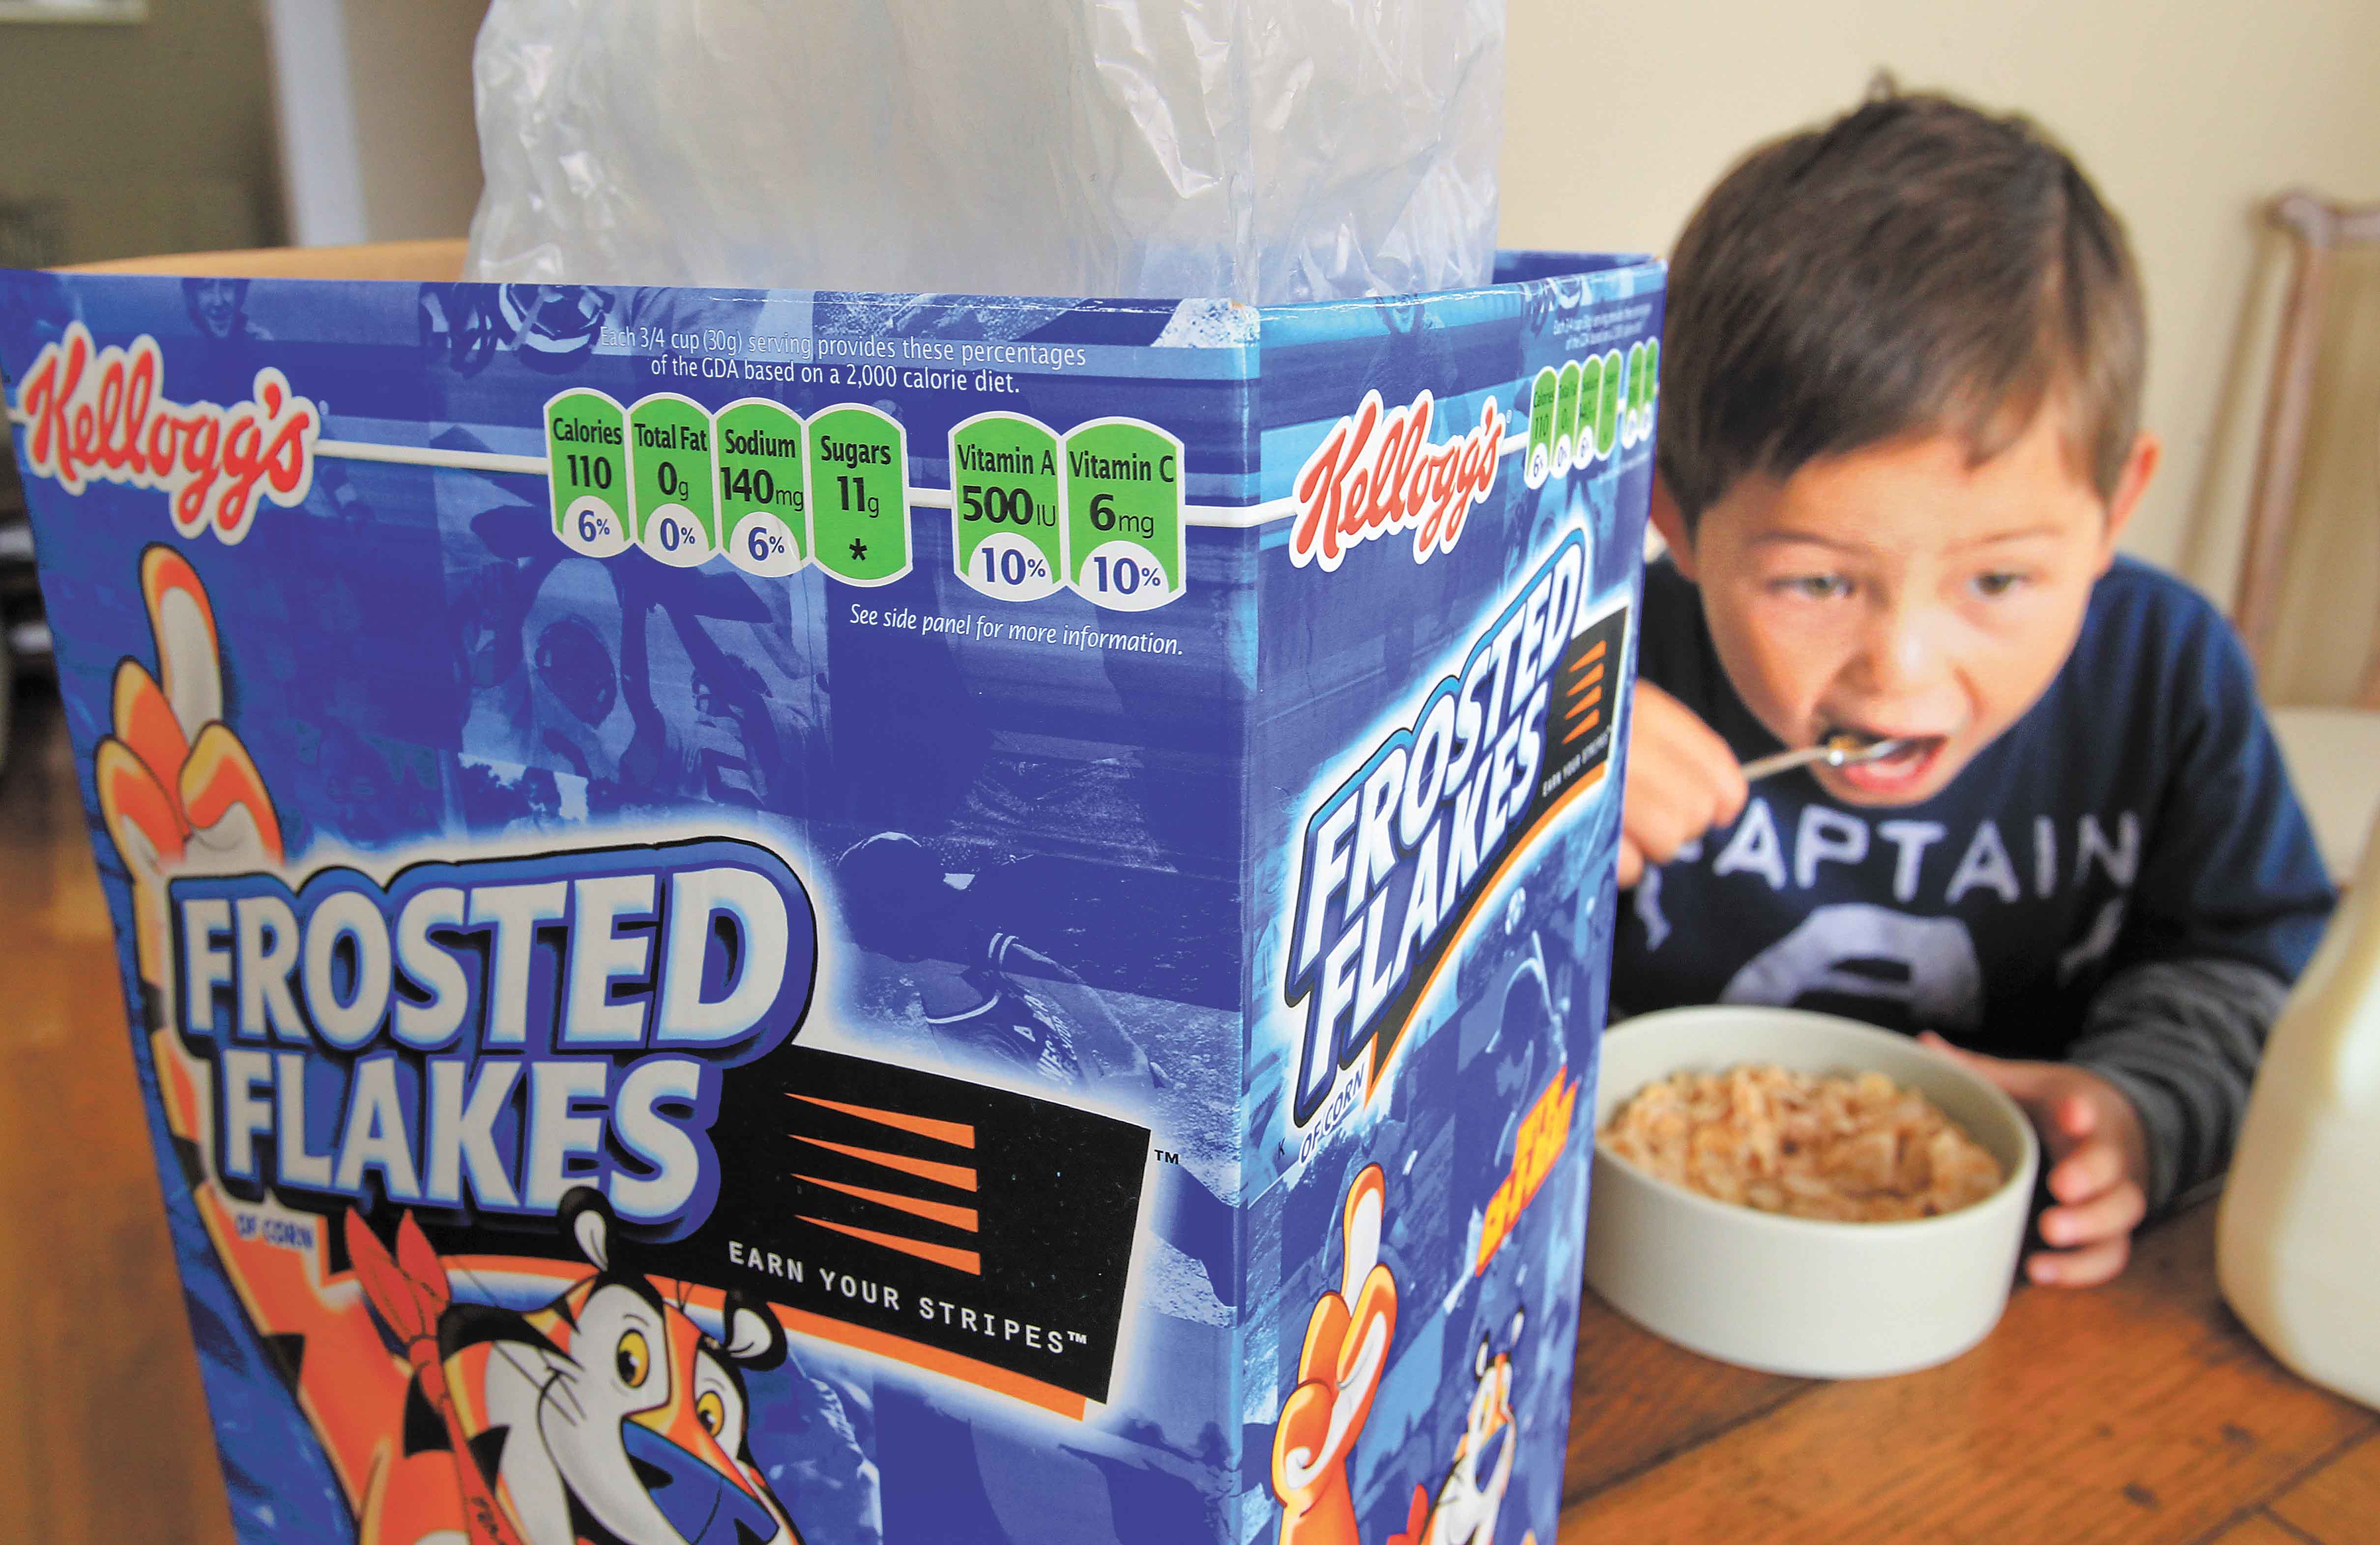 Nathaniel Donaker, 4, eats Kellogg’s Frosted Flakes cereal at his home in Palo Alto, Calif., on Thursday. Commercials promoting sugary breakfast cereals could be put on a strict diet under government guidelines.